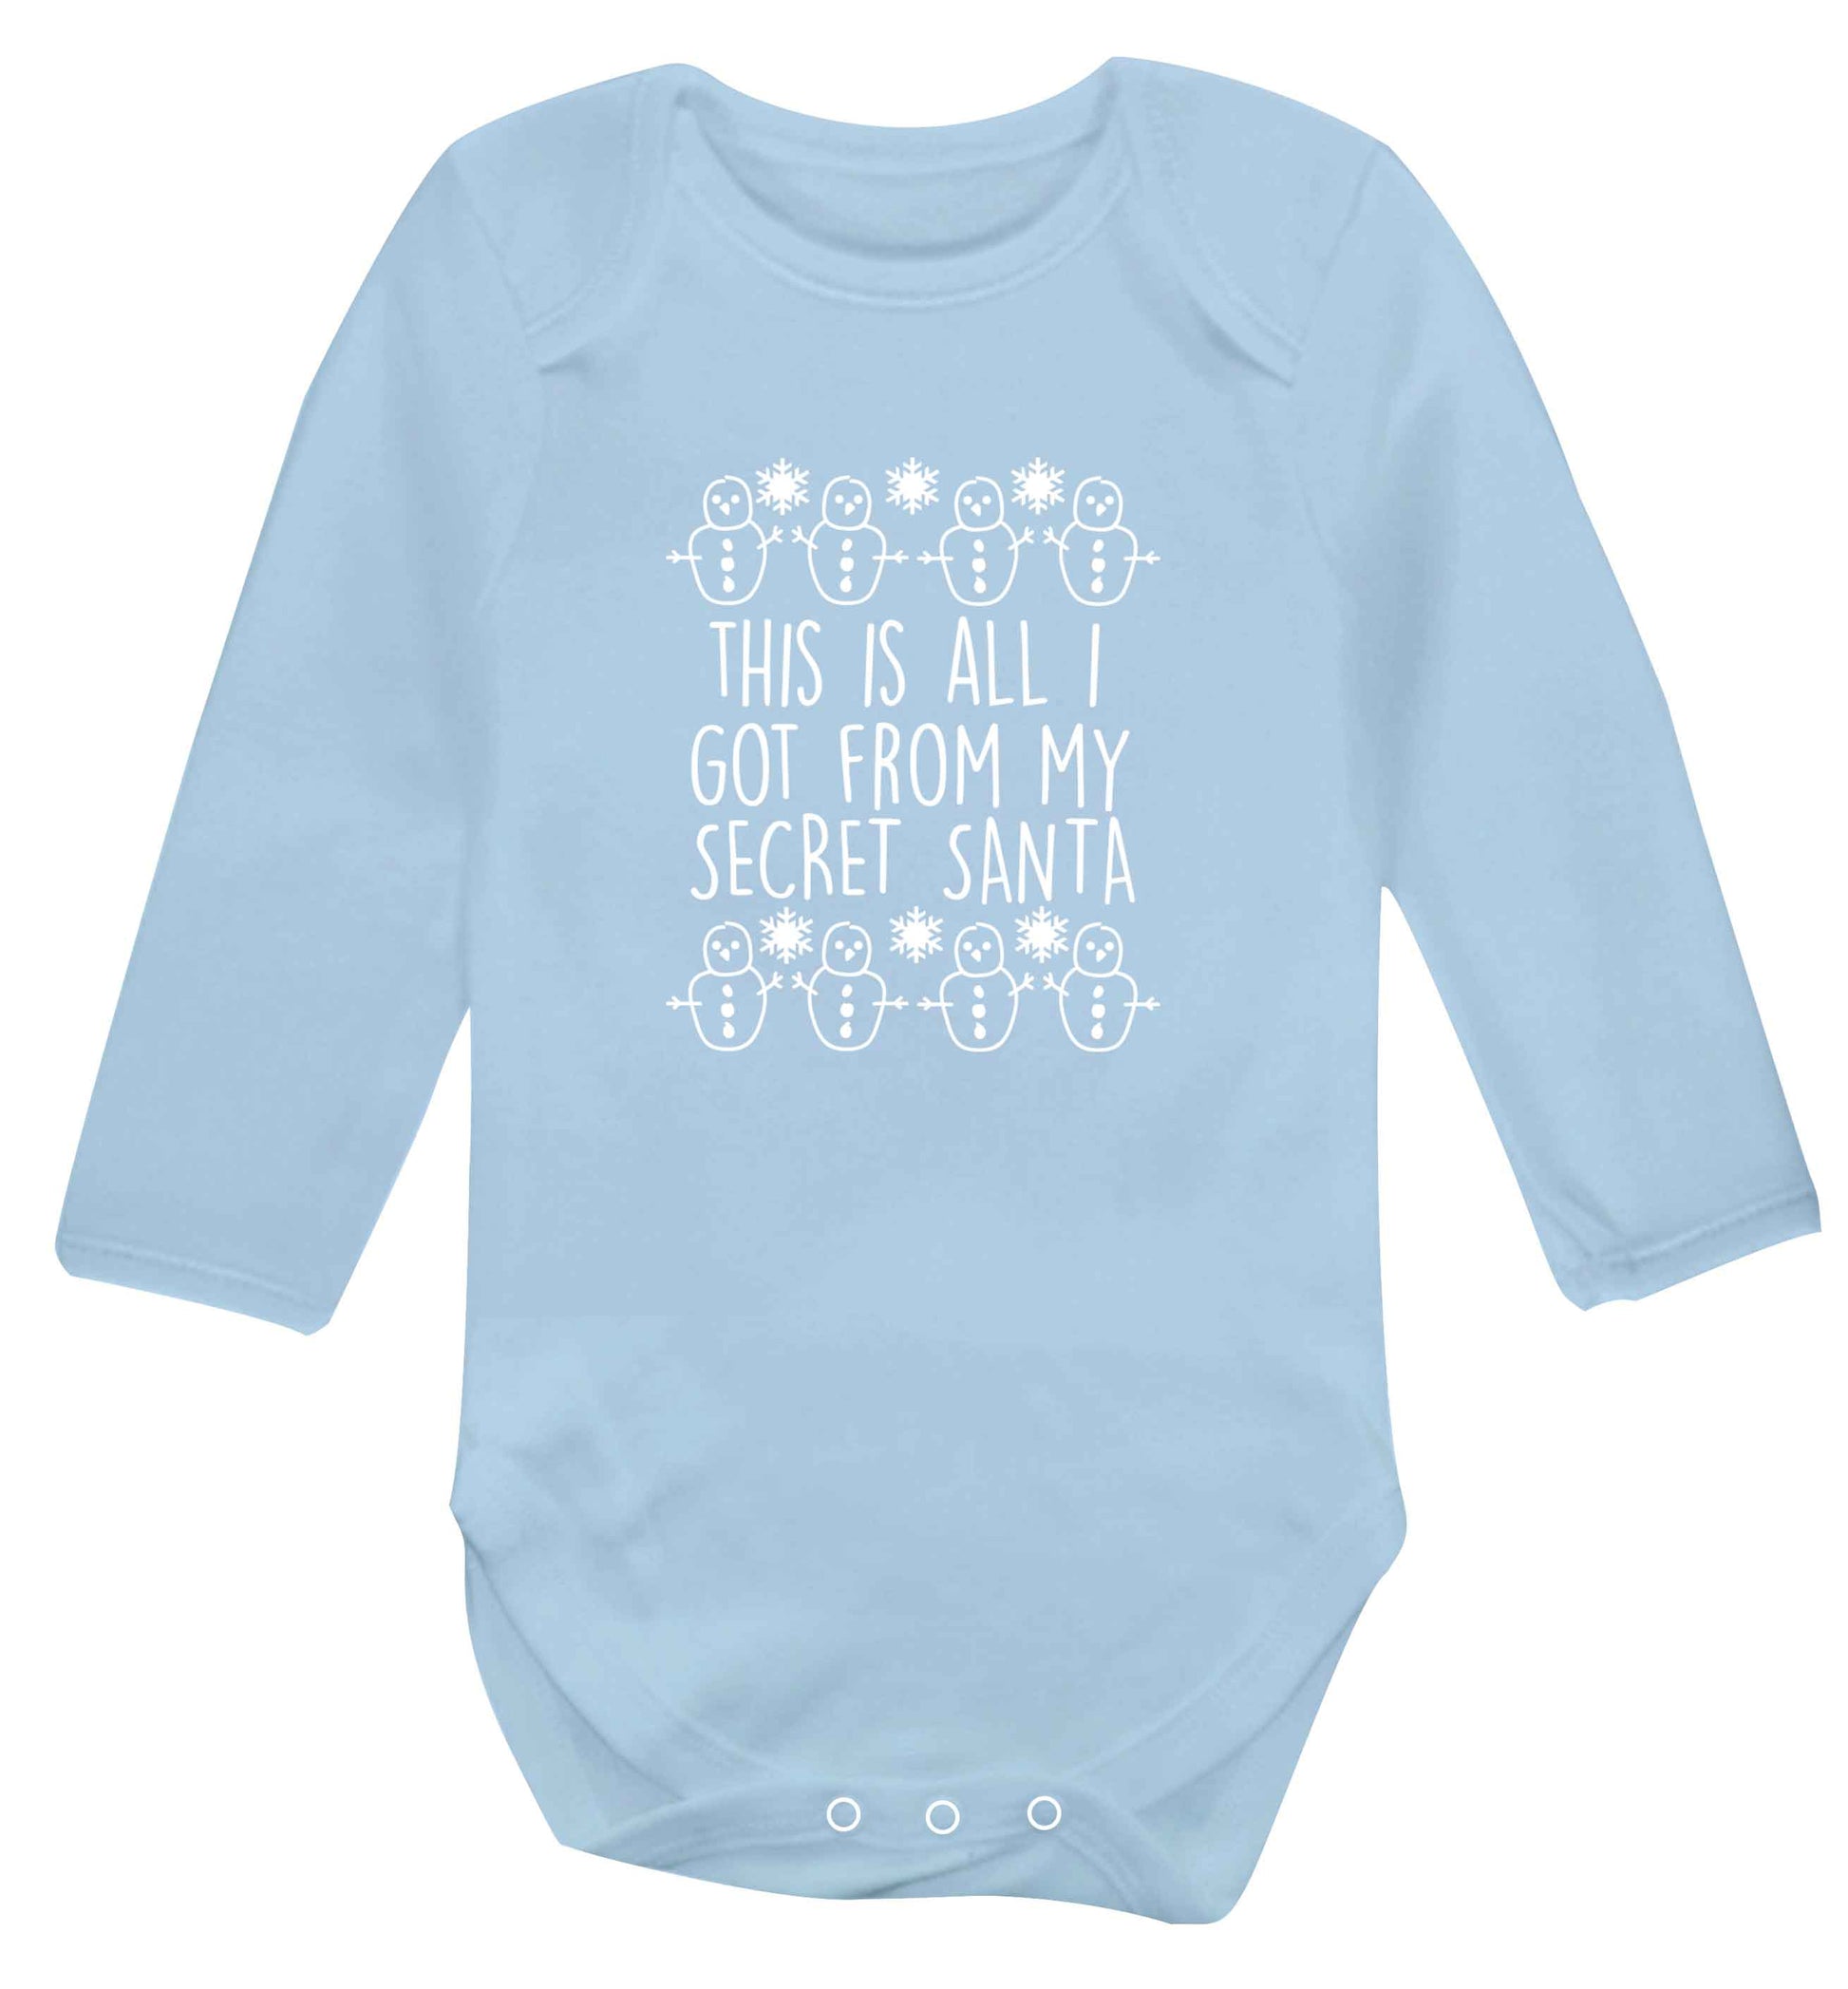 This is all I got from my secret Santa baby vest long sleeved pale blue 6-12 months